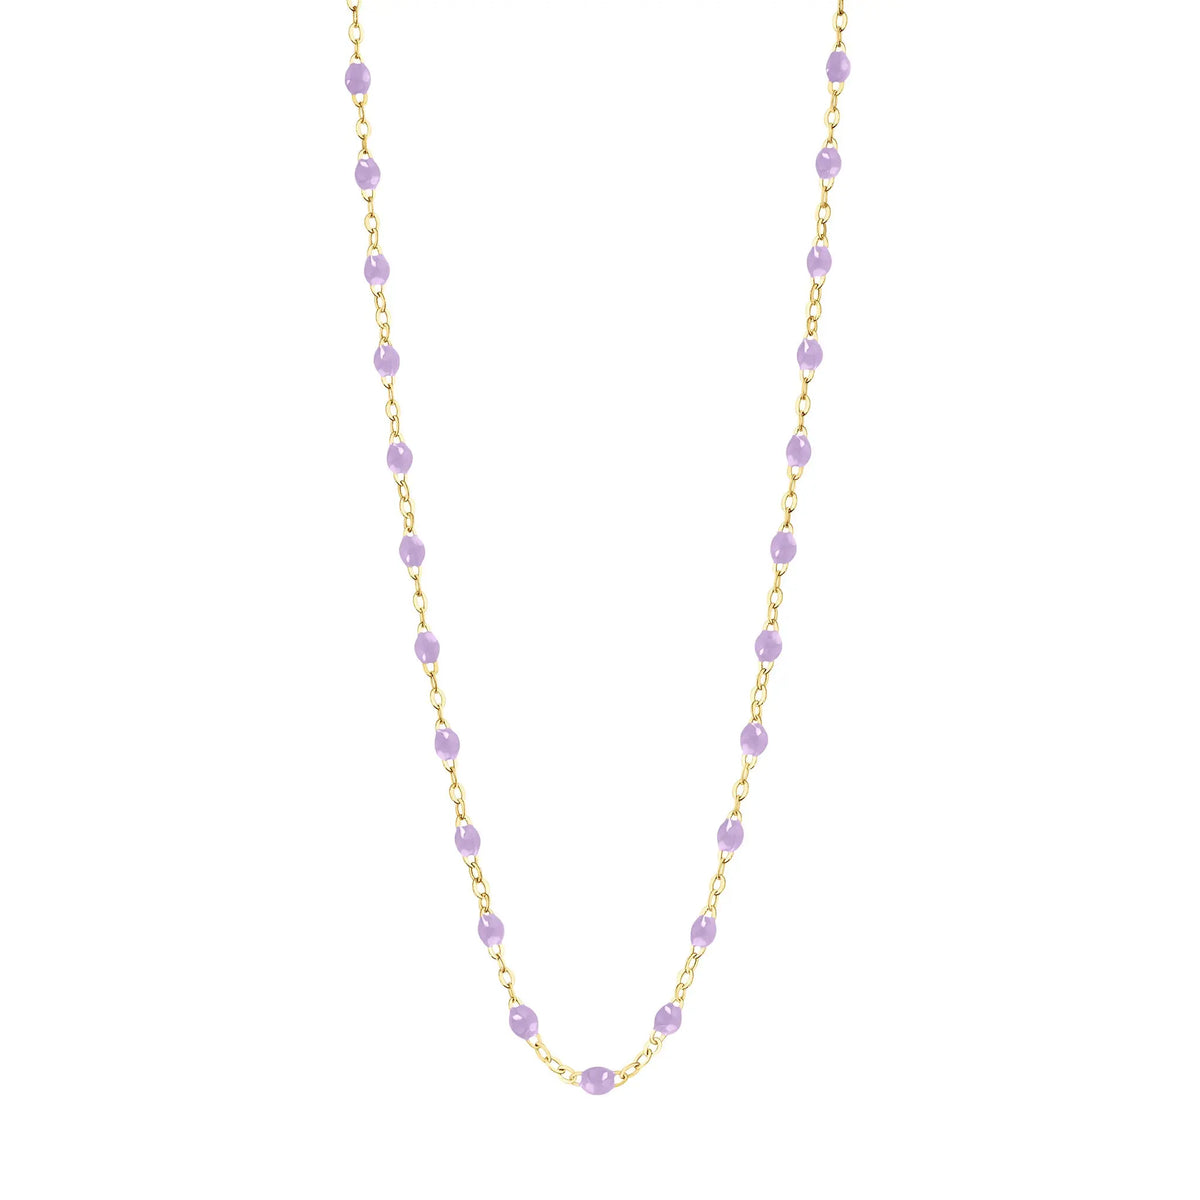 Stack you necklace layers with this versatile beaded chain! The Classic Gigi Necklace by gigi CLOZEAU features 18 carat yellow gold, and striking Lilac resin jewels for an everyday effortless appearance. Handcrafted in 18k yellow gold. The beads measure 1.50mm in diameter and is finished with a spring ring clasp. The length is 16.5 inches.